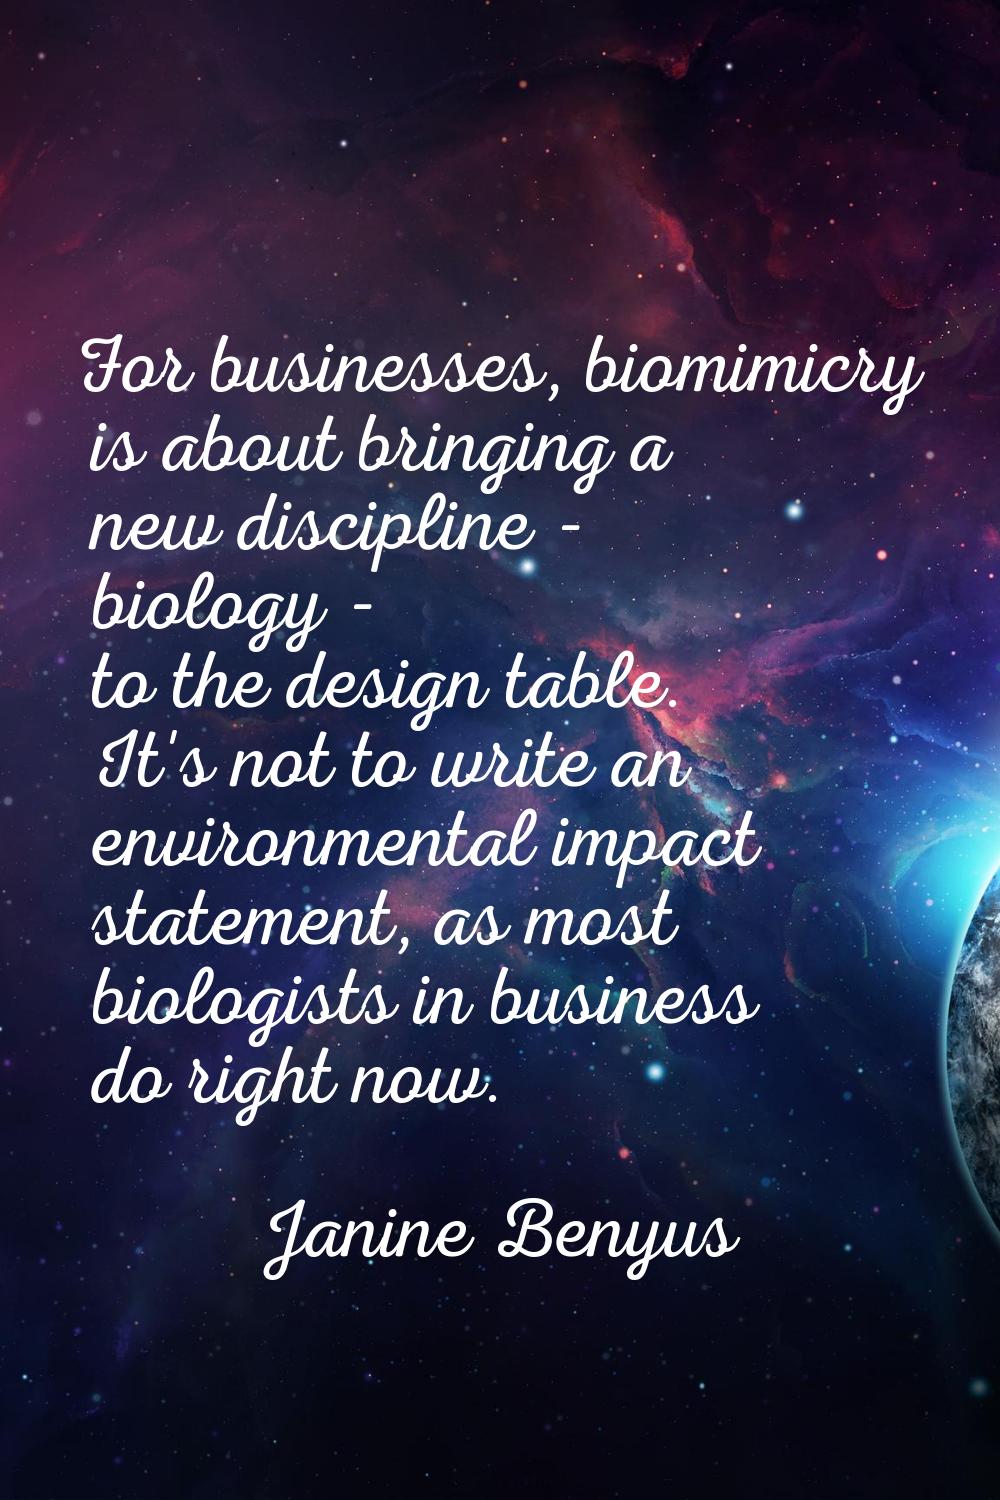 For businesses, biomimicry is about bringing a new discipline - biology - to the design table. It's